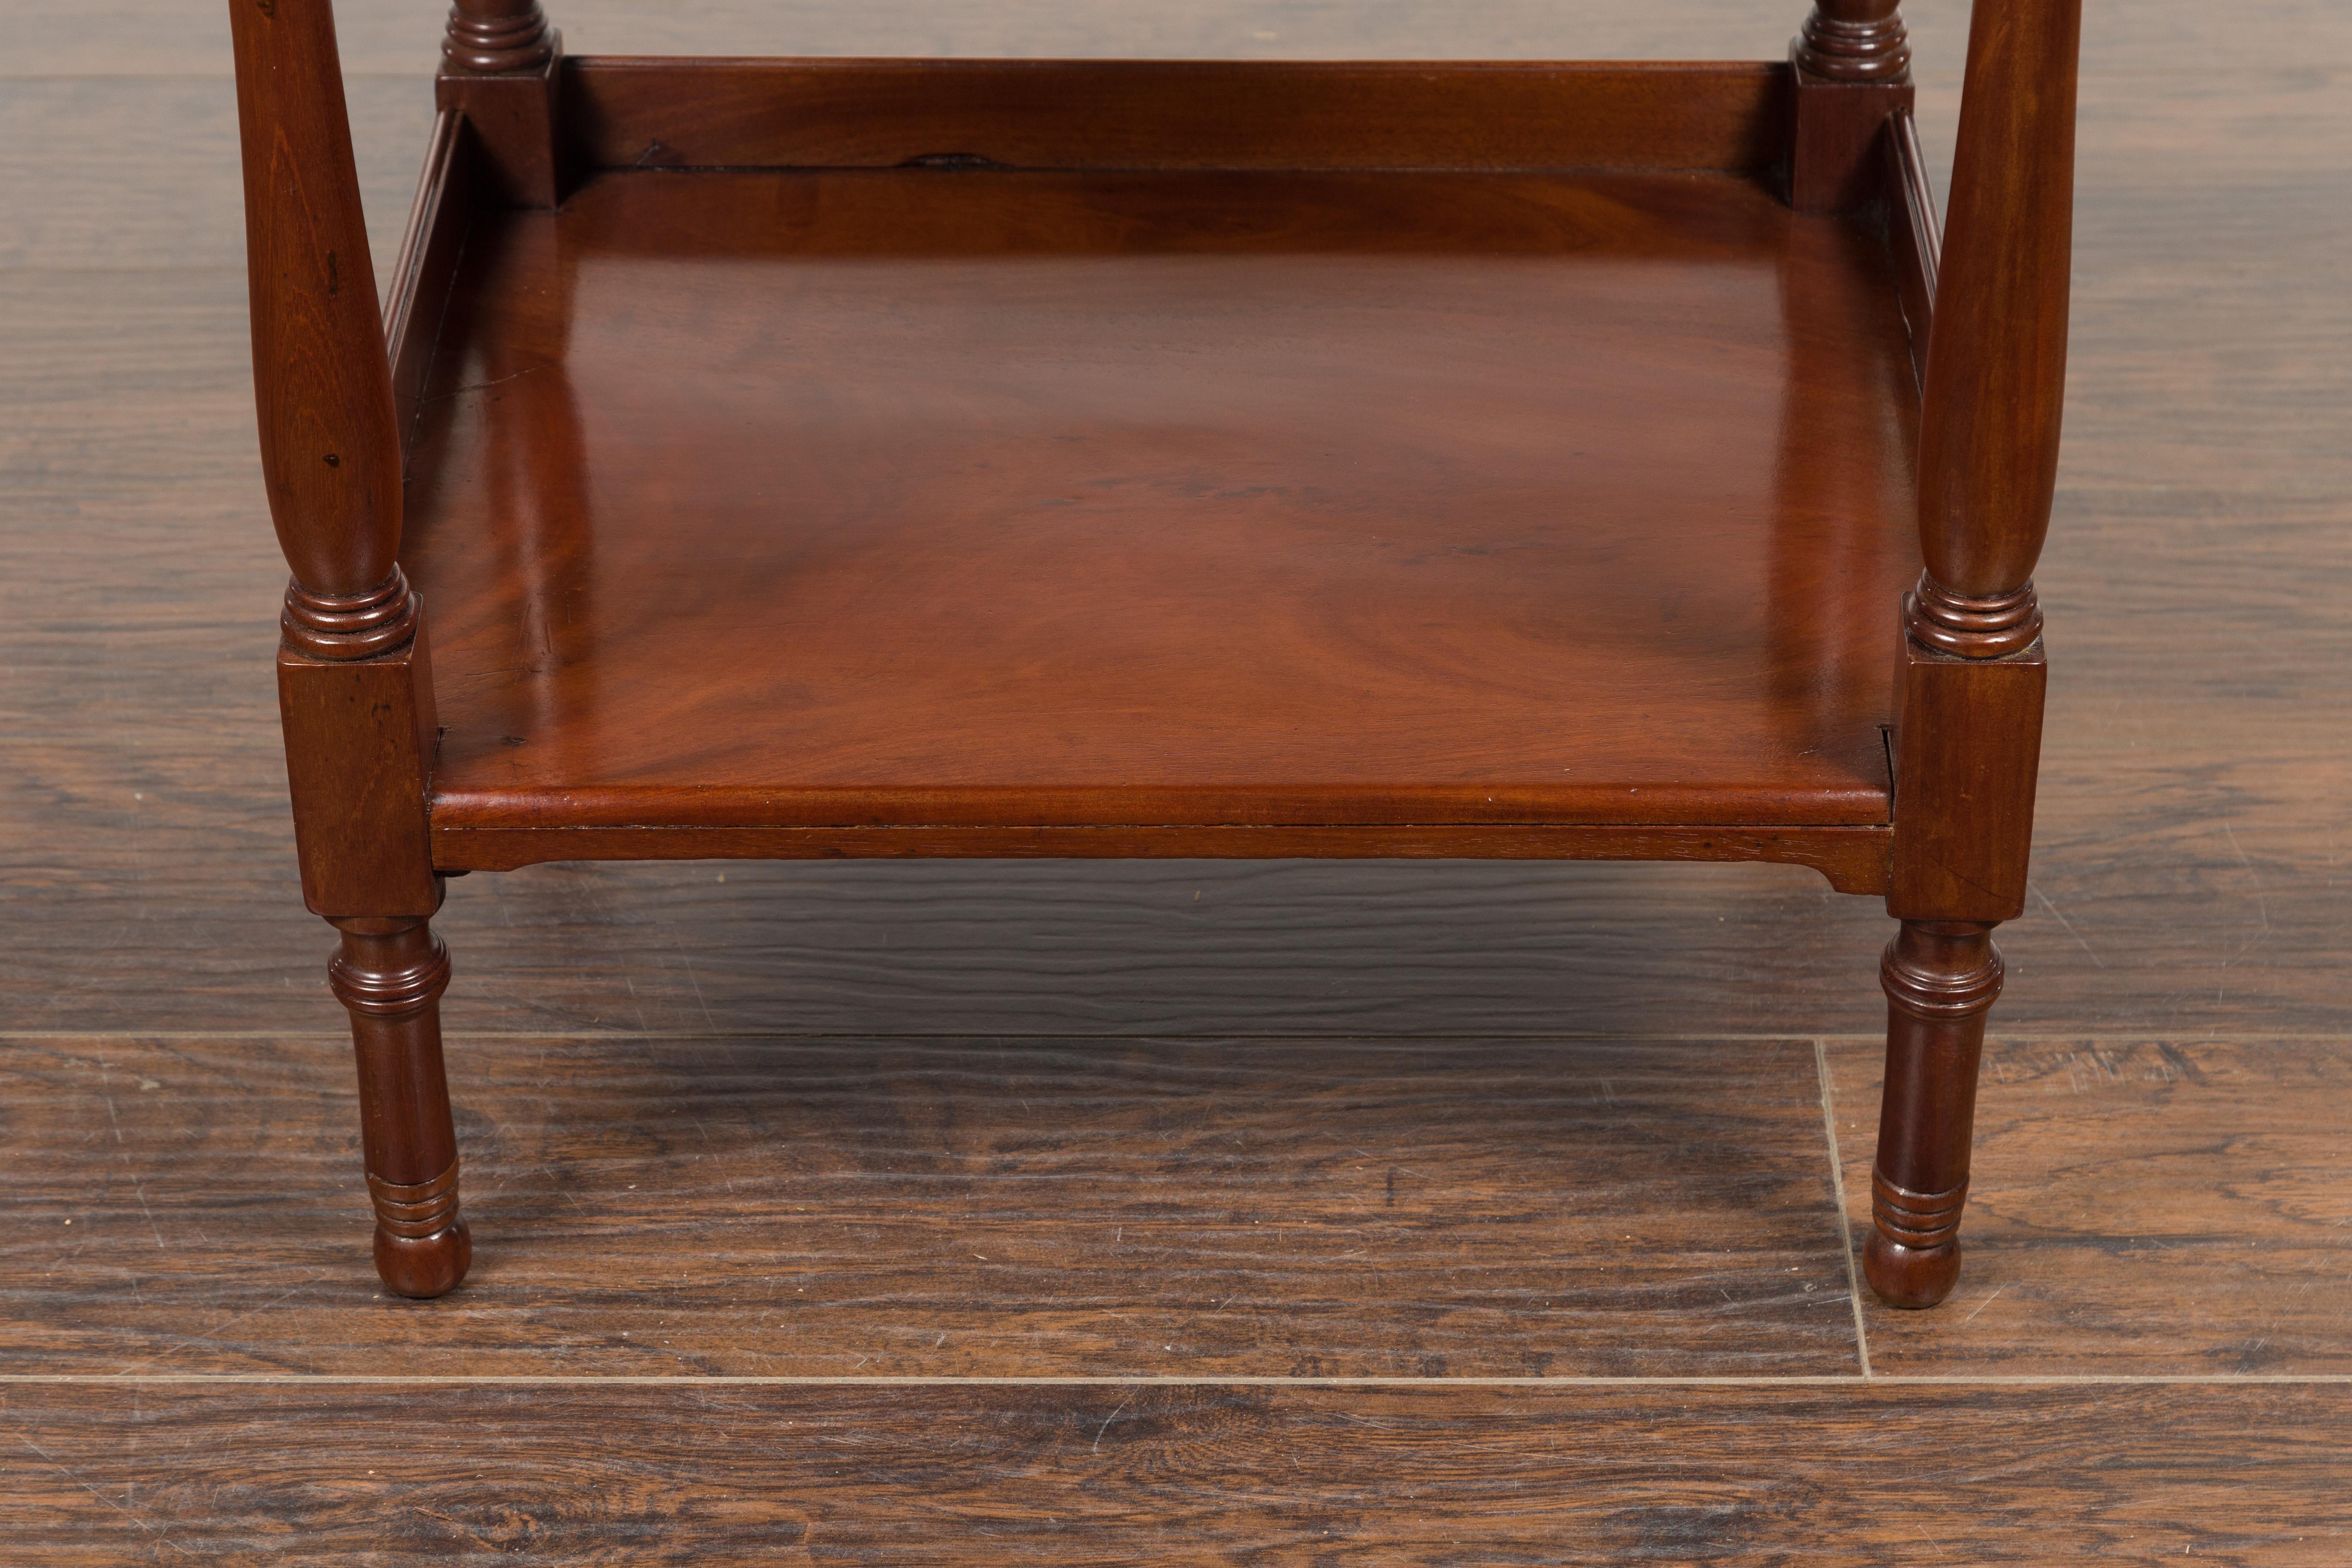 English 1870s Mahogany Tiered Table with Turned Legs and Low Shelf and Finials 3